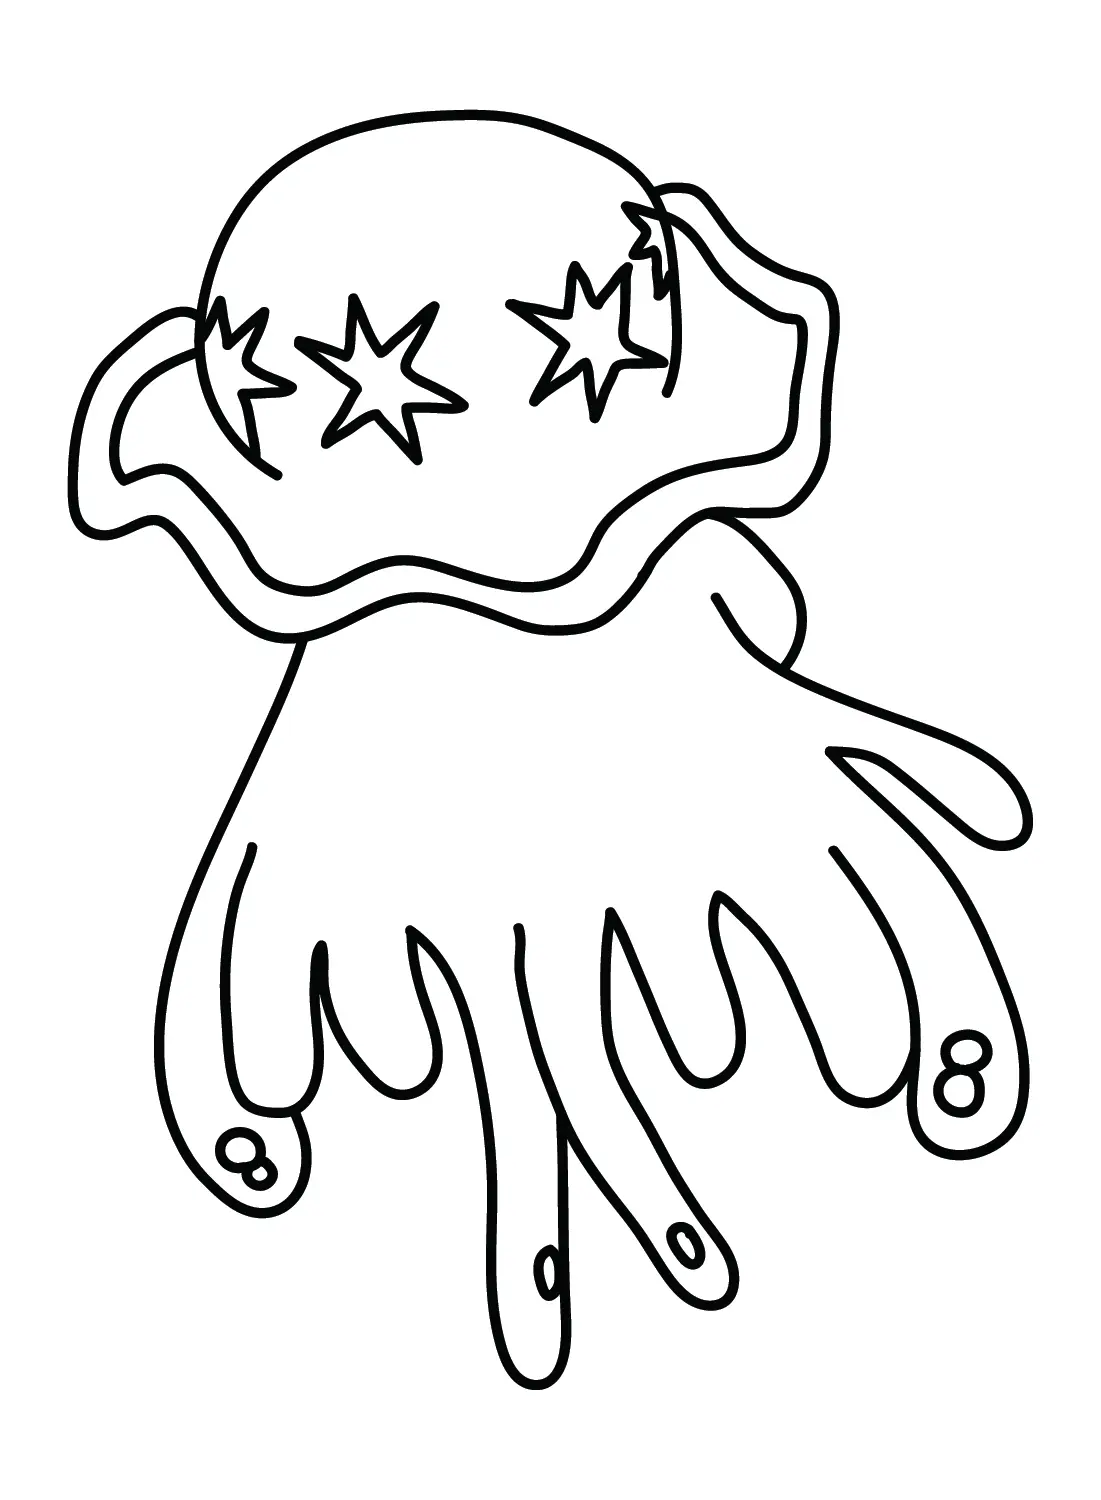 Nihilego Coloring Pages